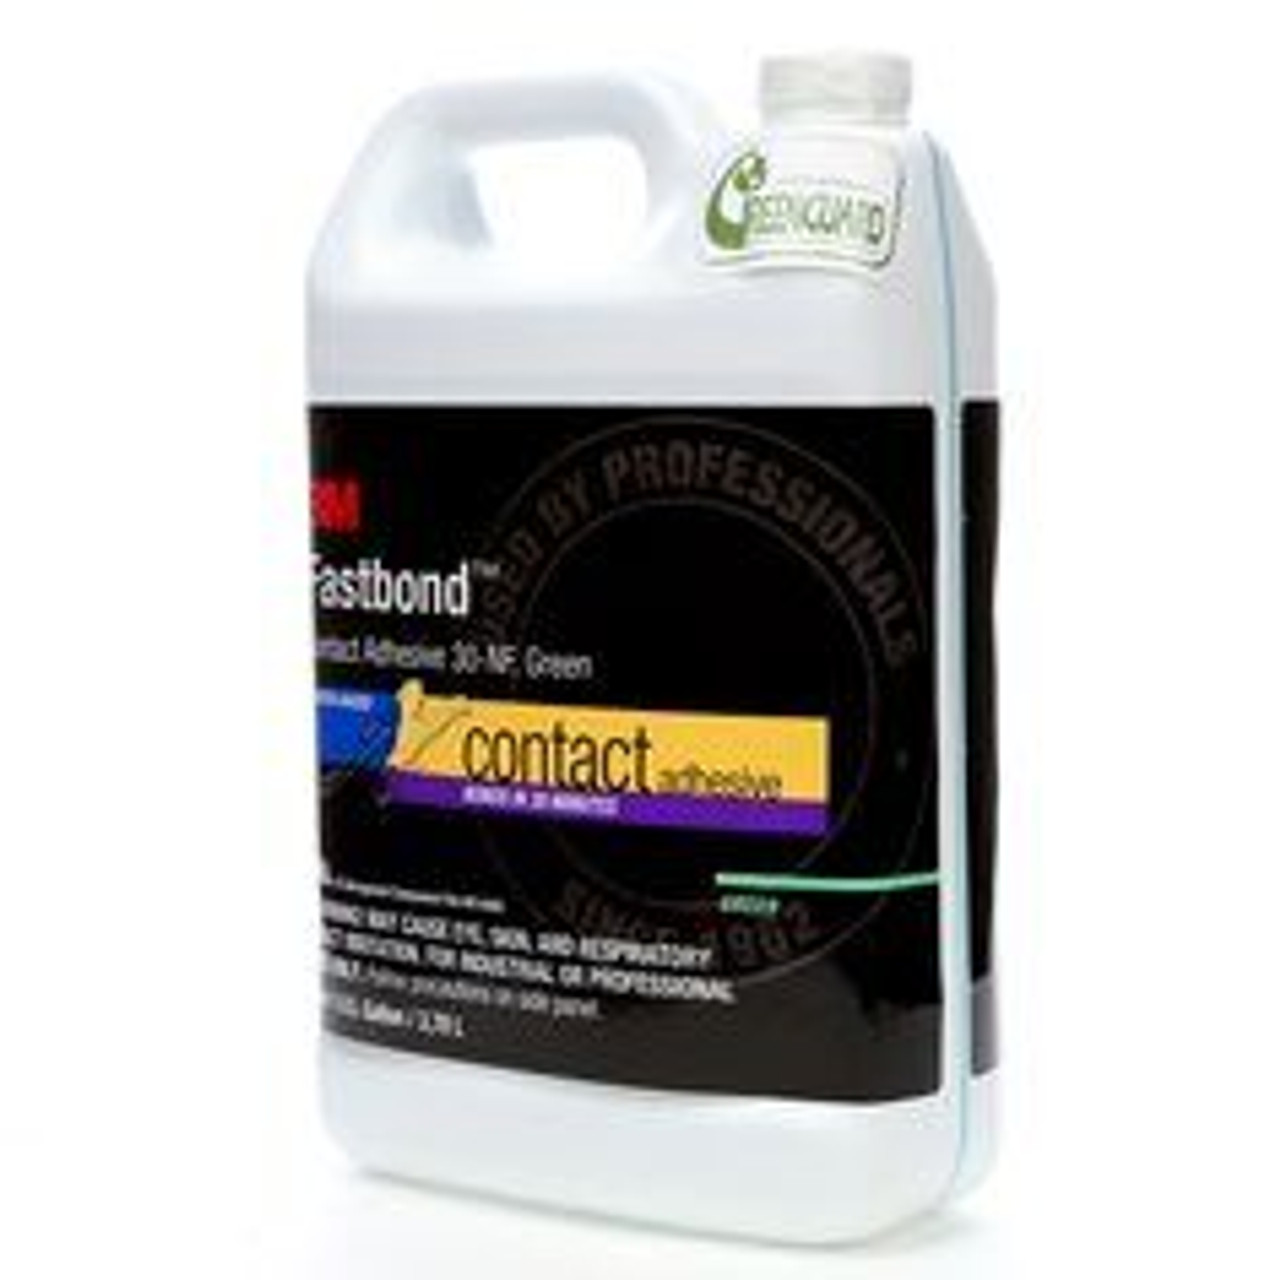 3M 30NF Fastbond™ Contact Adhesive, 1 gal Can, Green, 4/Case